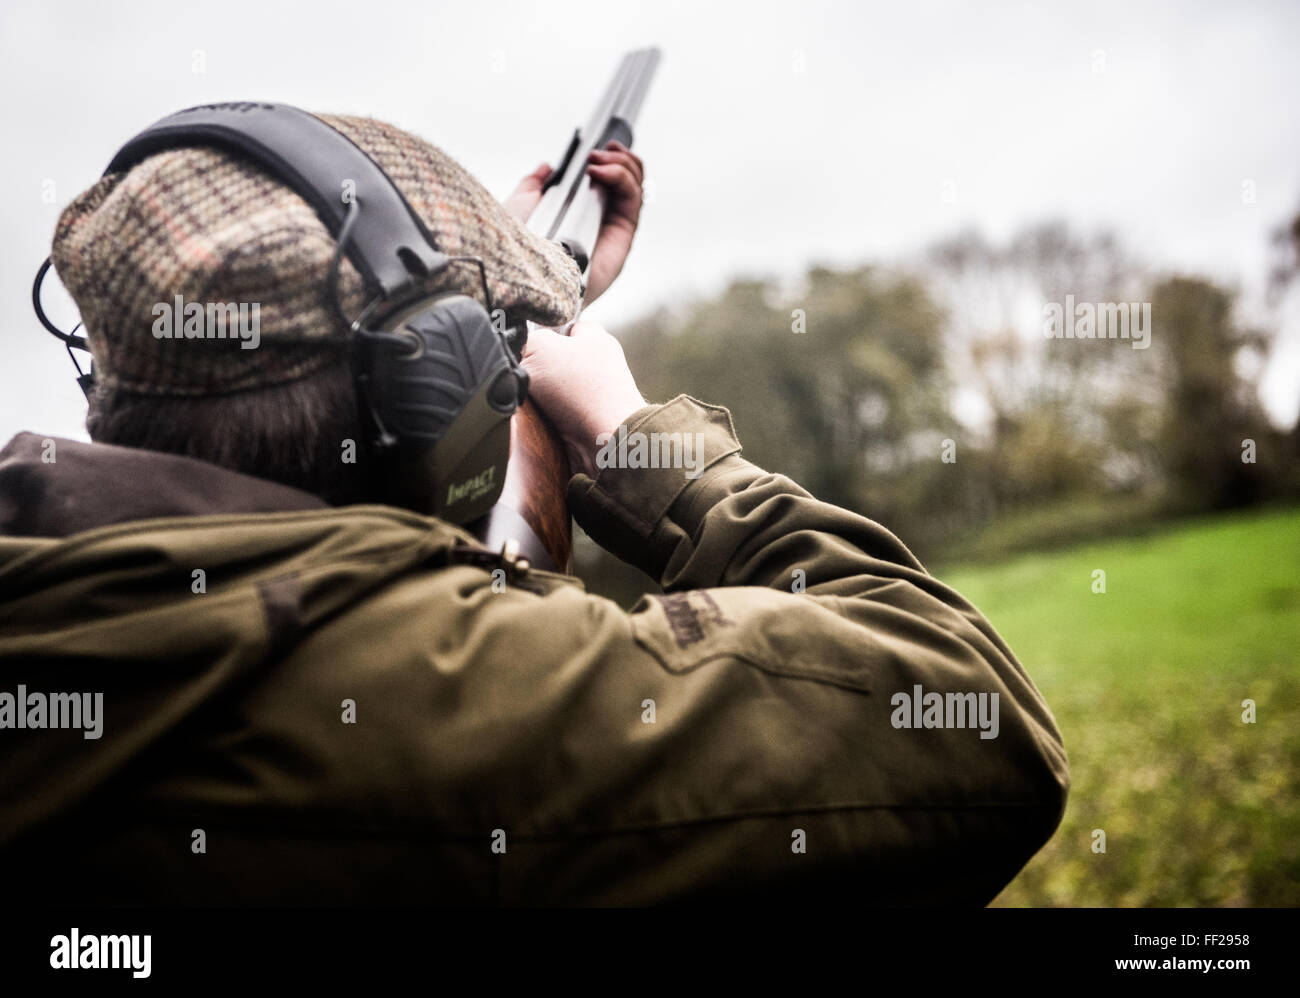 Gun on a shoot in Wiltshire, England, United Kingdom, Europe Stock Photo